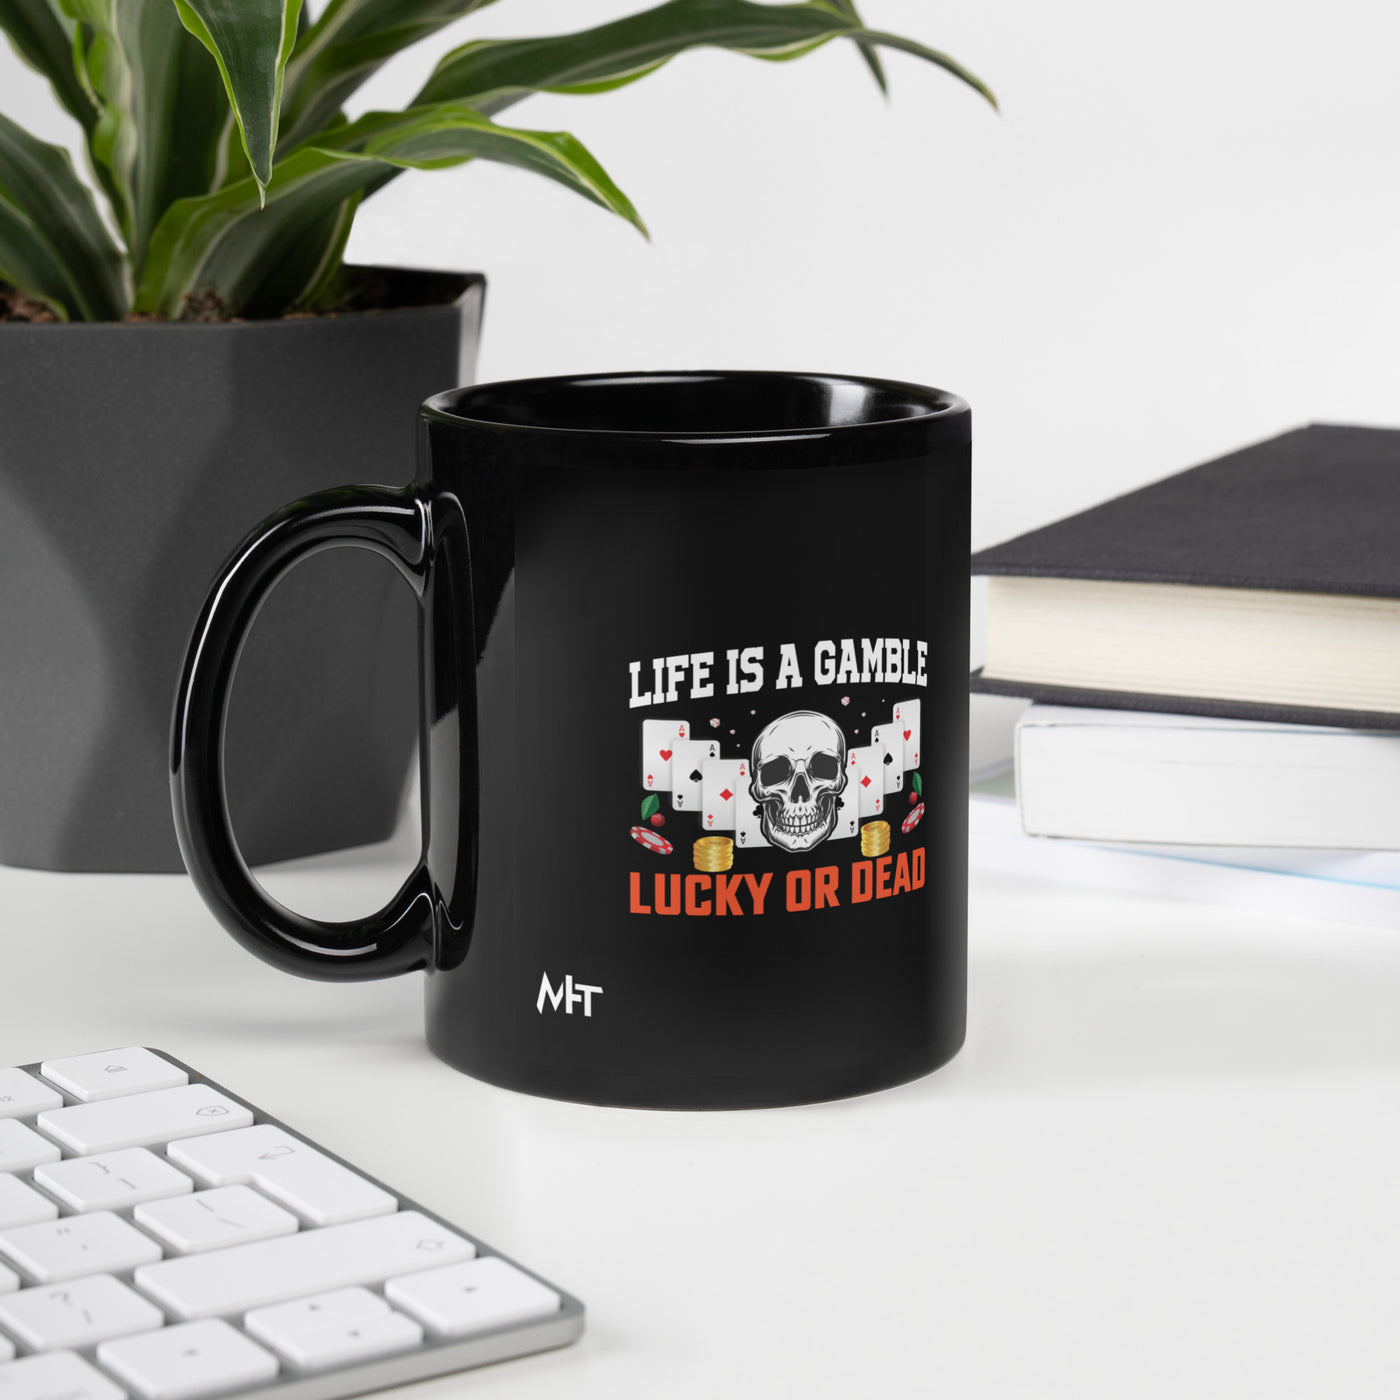 Life is a Gamble; Lucky or Dead - Black Glossy Mug